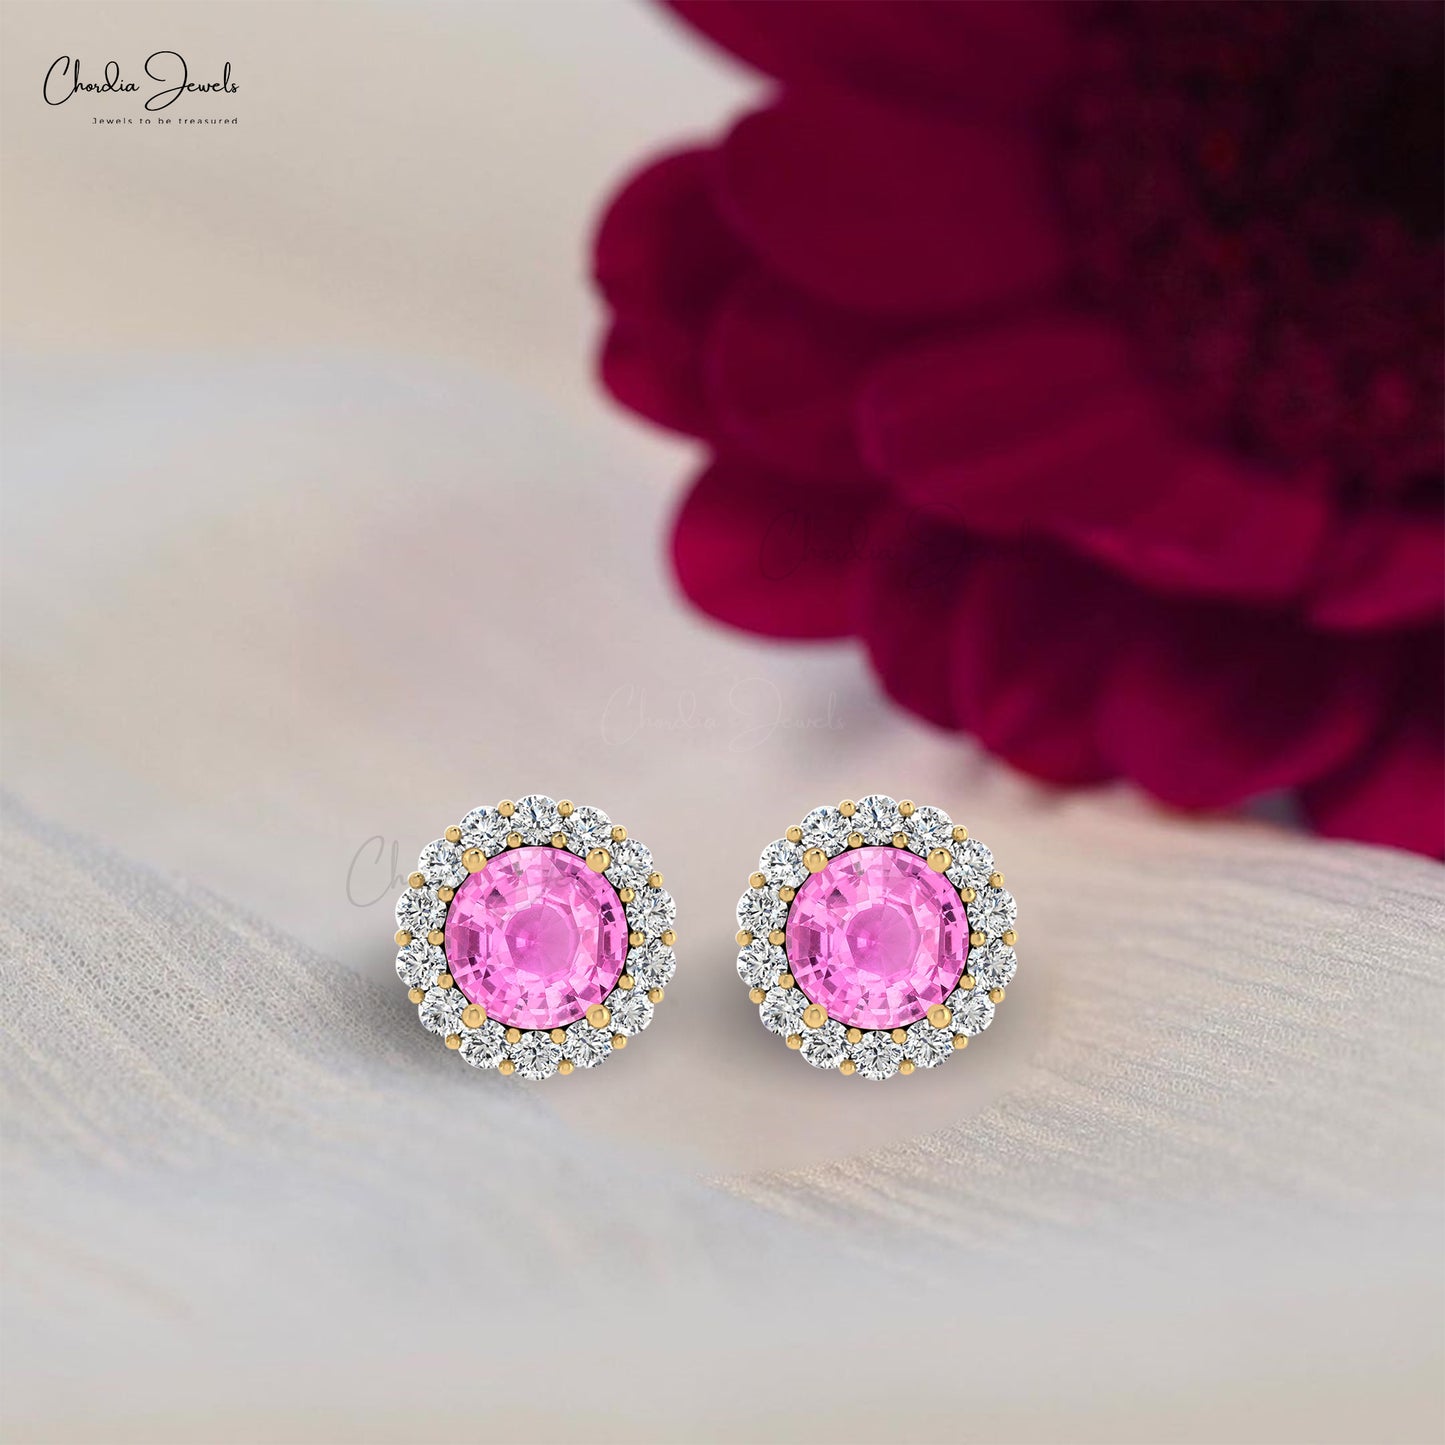 September Birthstone 4mm Round Cut Natural Pink Sapphire Halo Earrings 14k Solid Gold G-H Diamond Hallmarked Jewelry